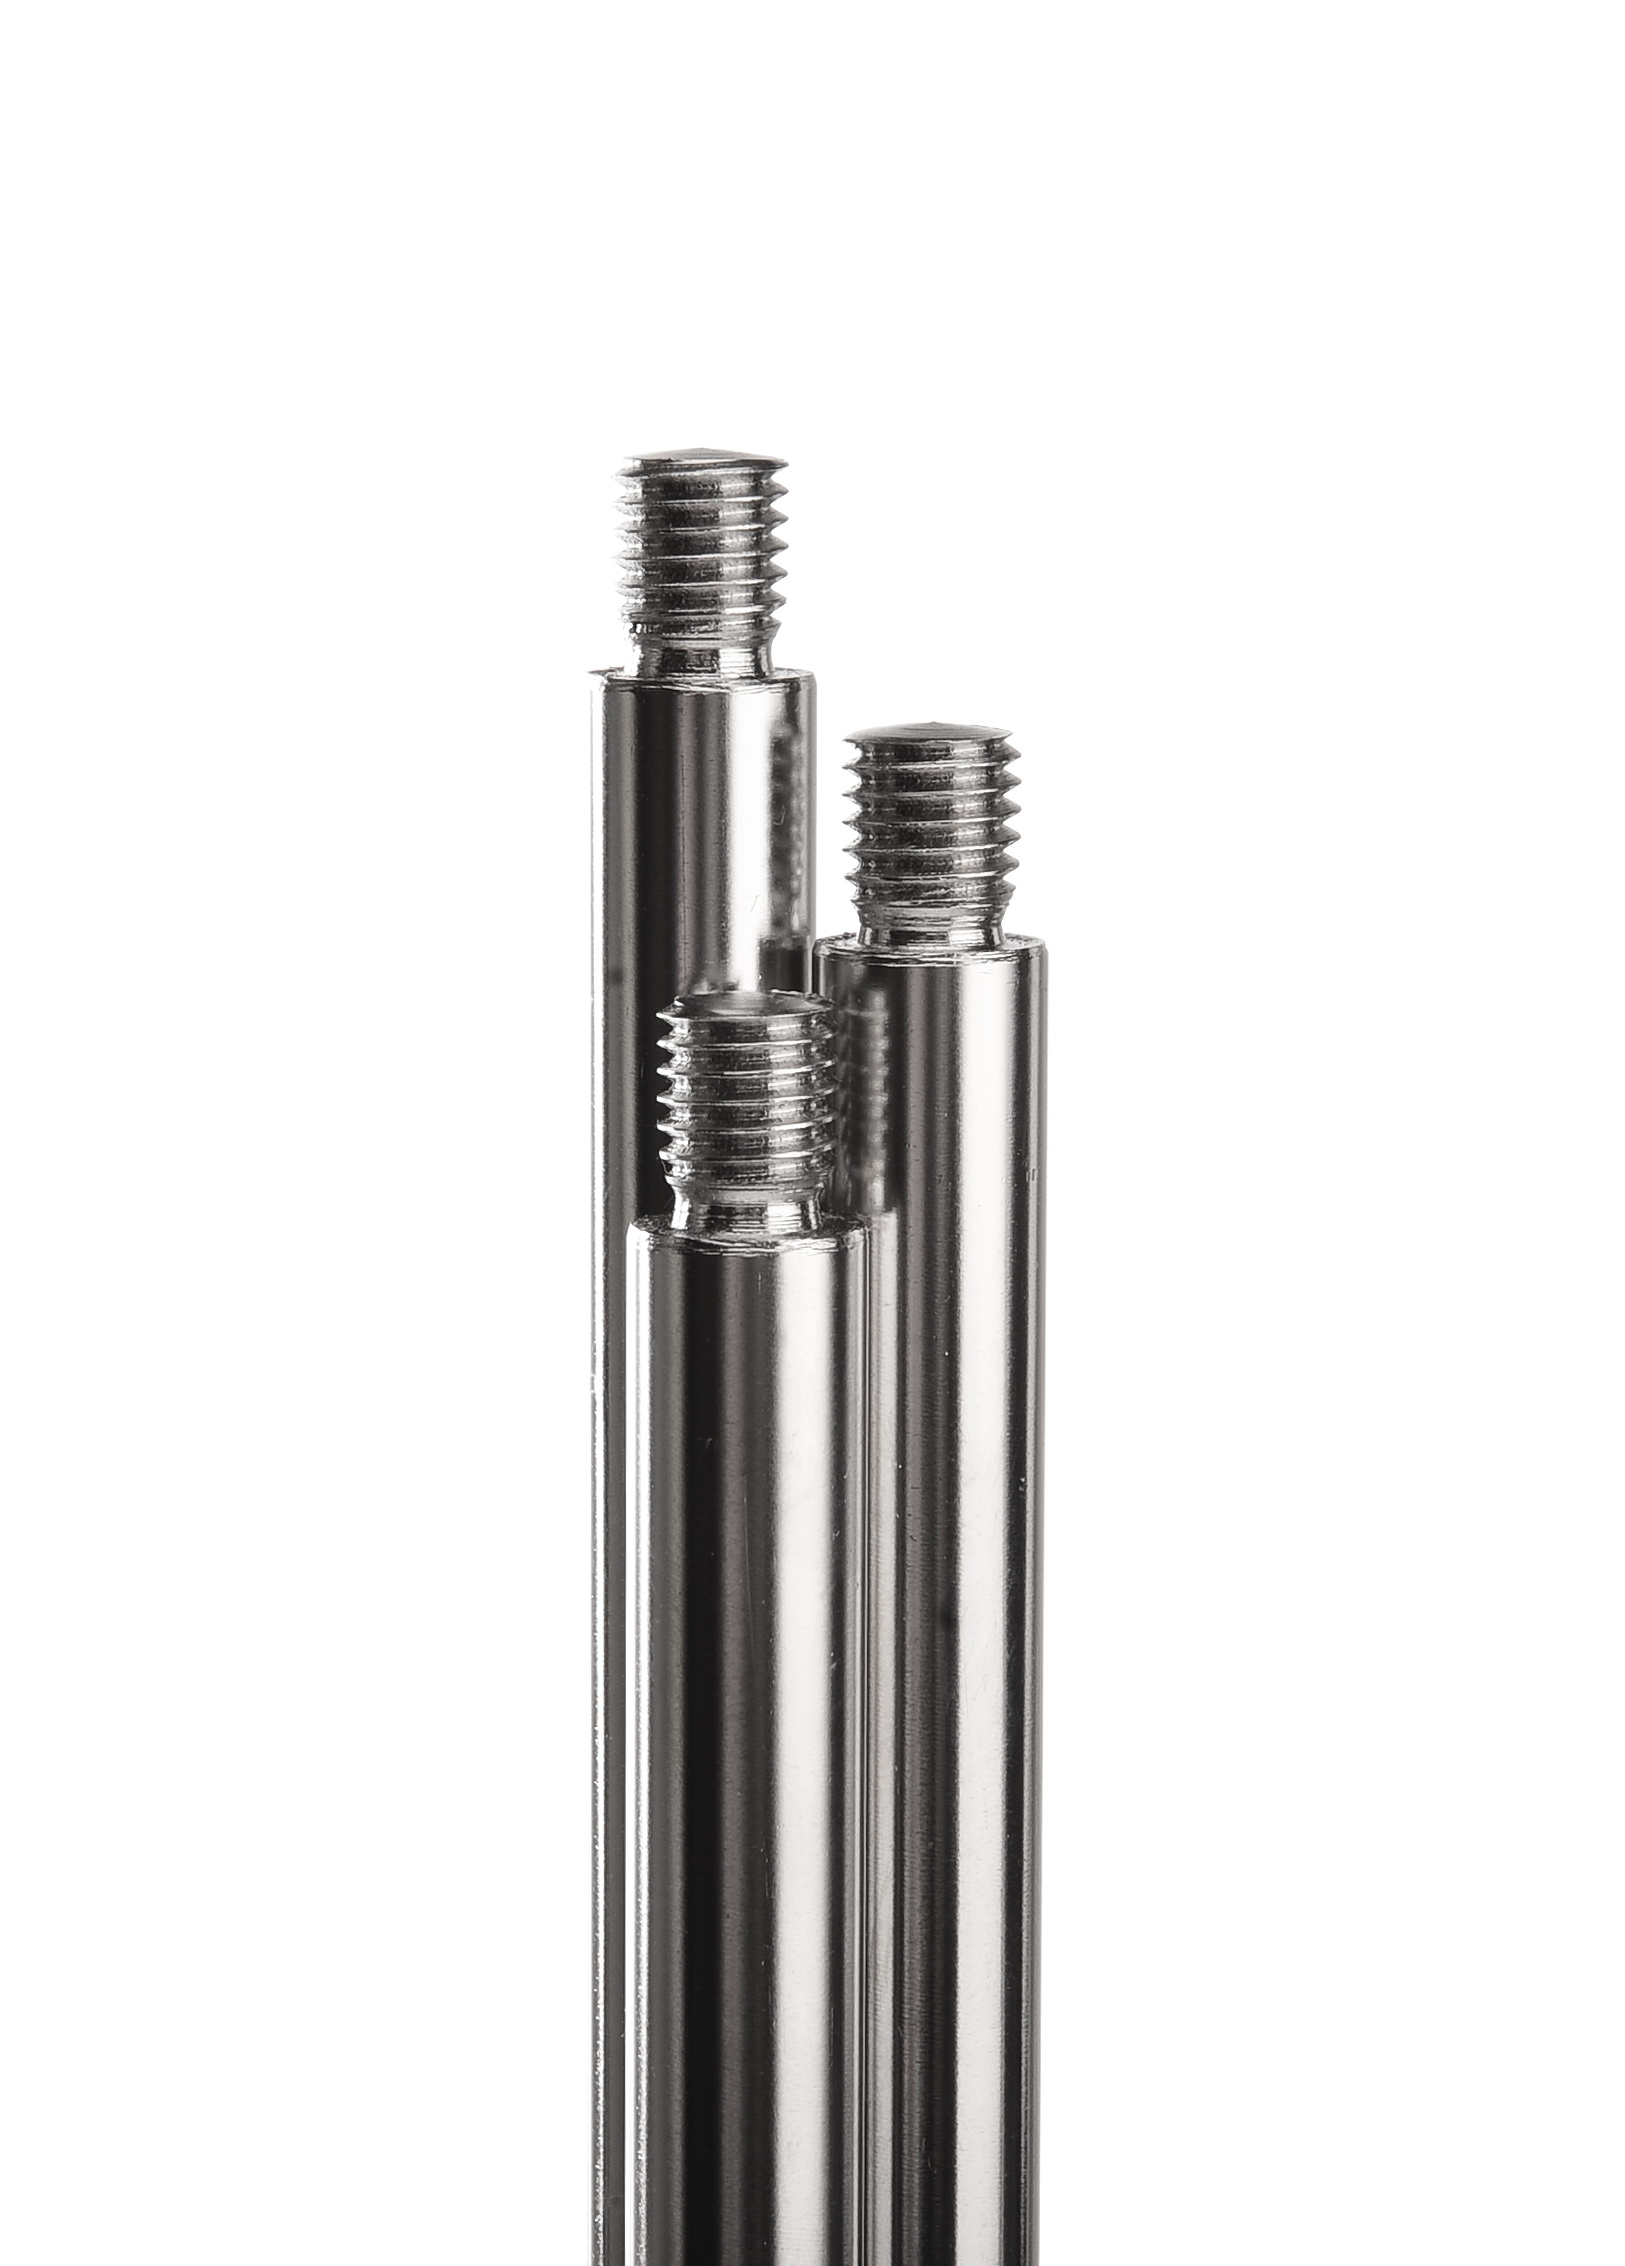 Rods for stand bases M10, 18/10 stainless steel